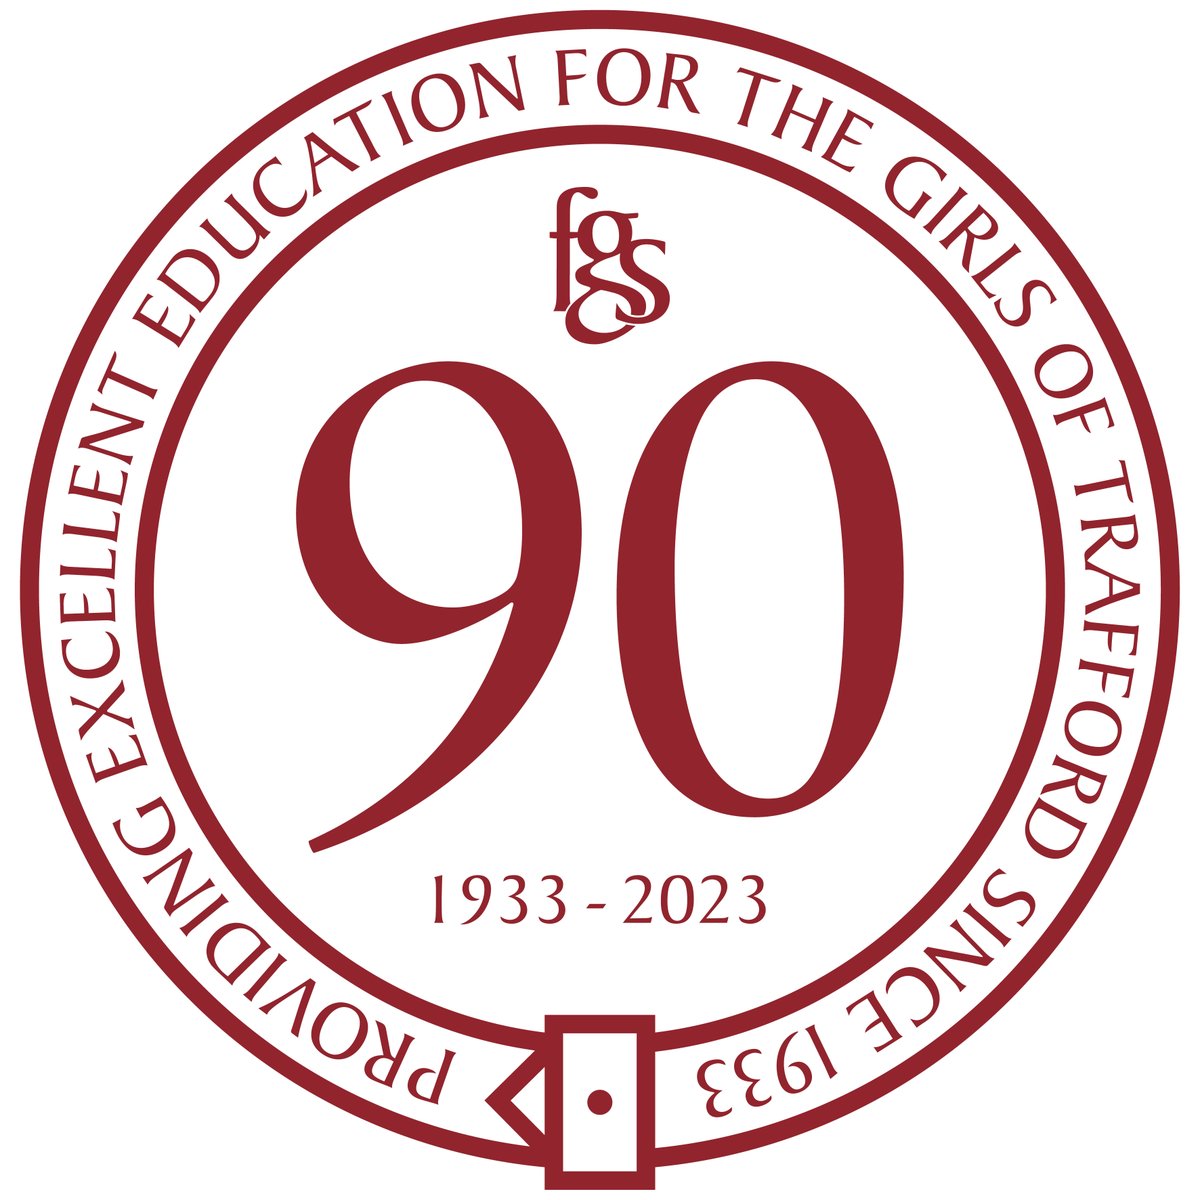 Welcome back to all our #Flixtonfamily members, school reopens tomorrow 5th Sept, for all year groups - gates open at 8.15 until 8.40am - please be prompt & fully prepared. We're all looking forward to another great academic year, in fact our 90th! #90th #newacademicyear